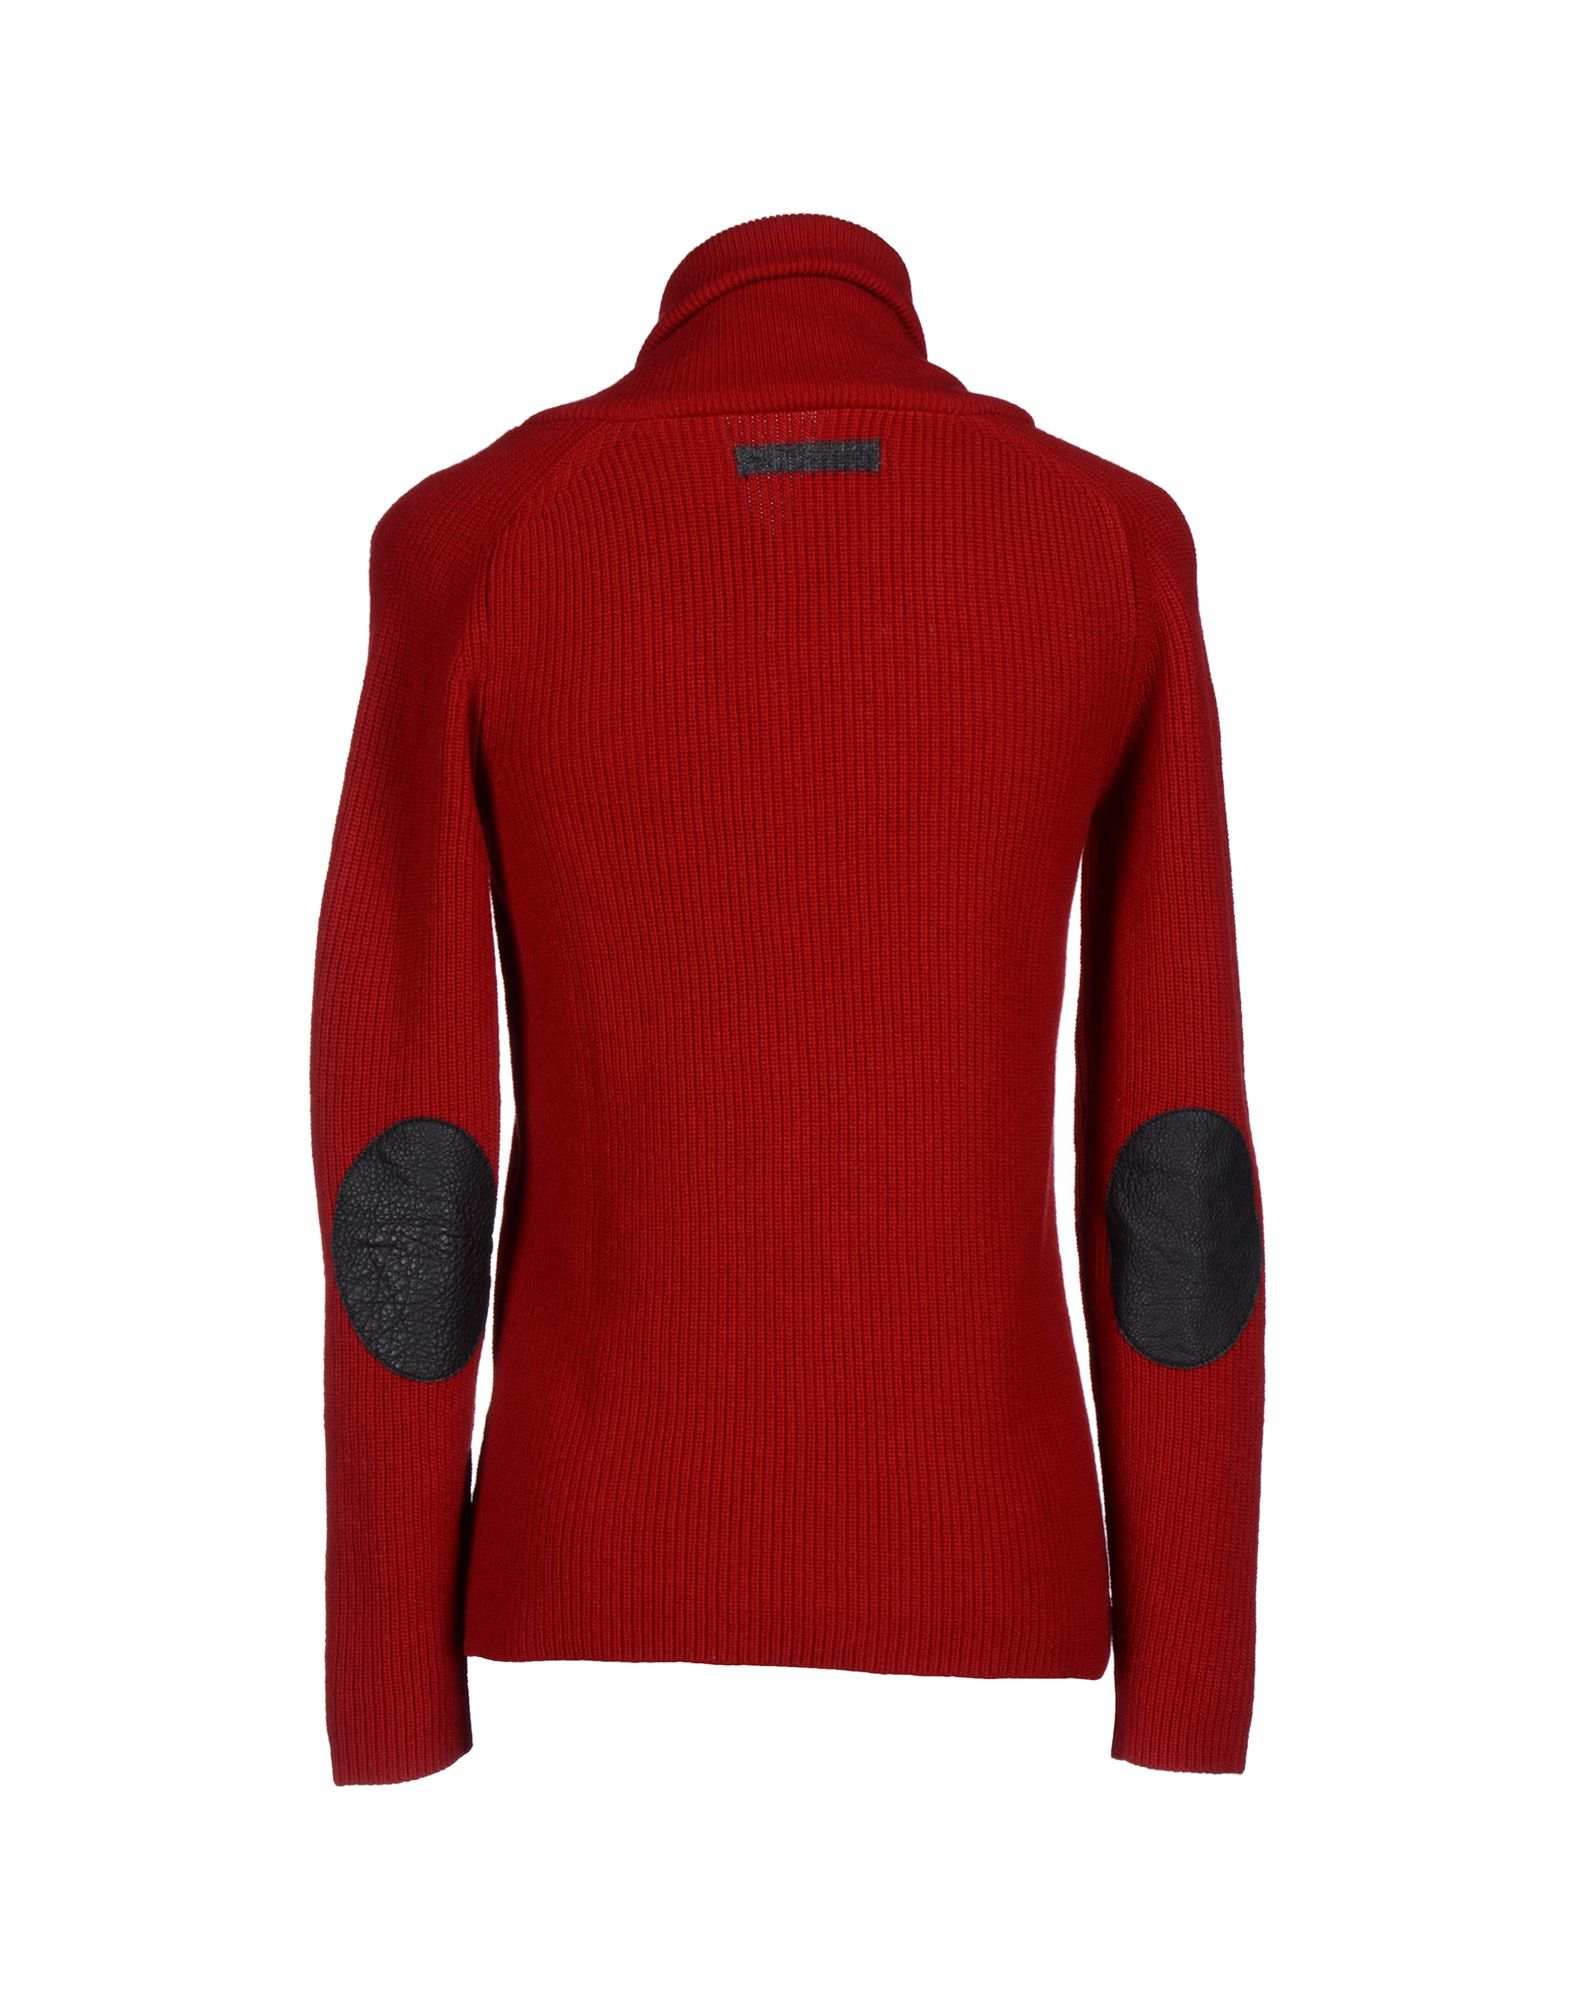 Paolo Pecora Wool Turtleneck in Red for Men - Lyst